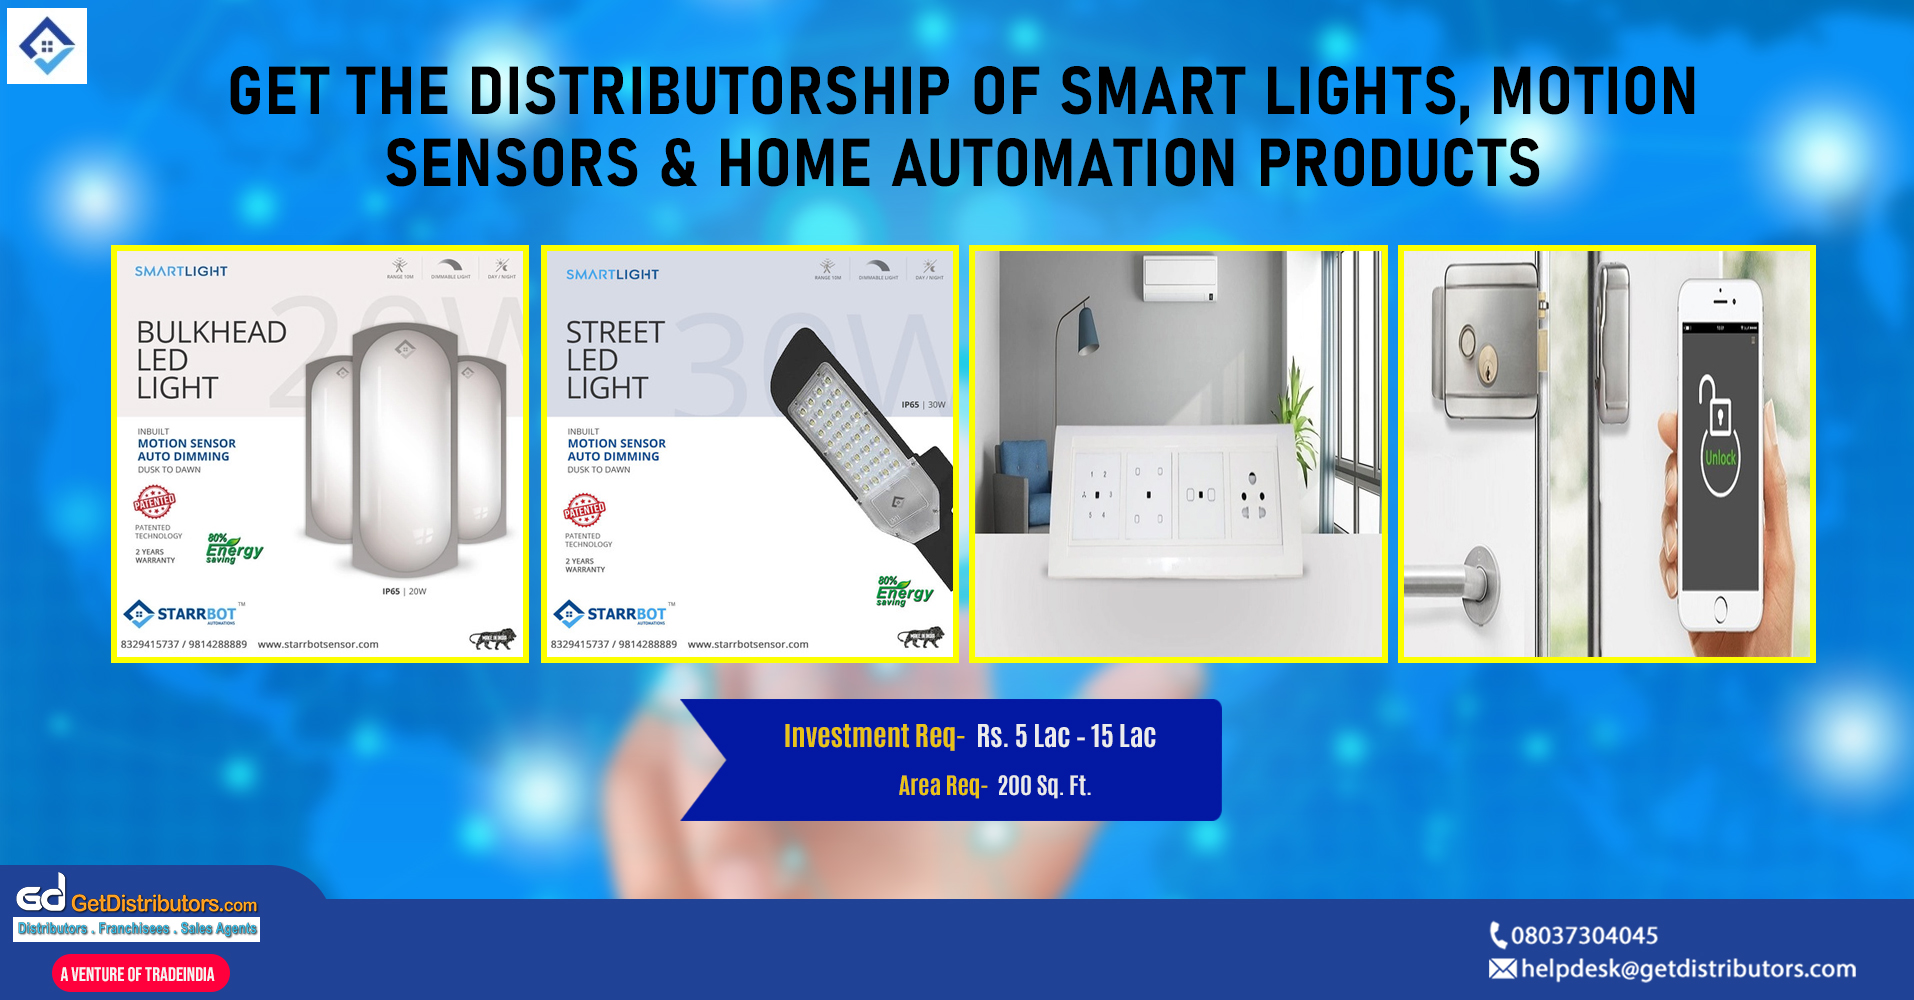 High-quality Smart Lights, Motion Sensors & Home Automation Products for distribution